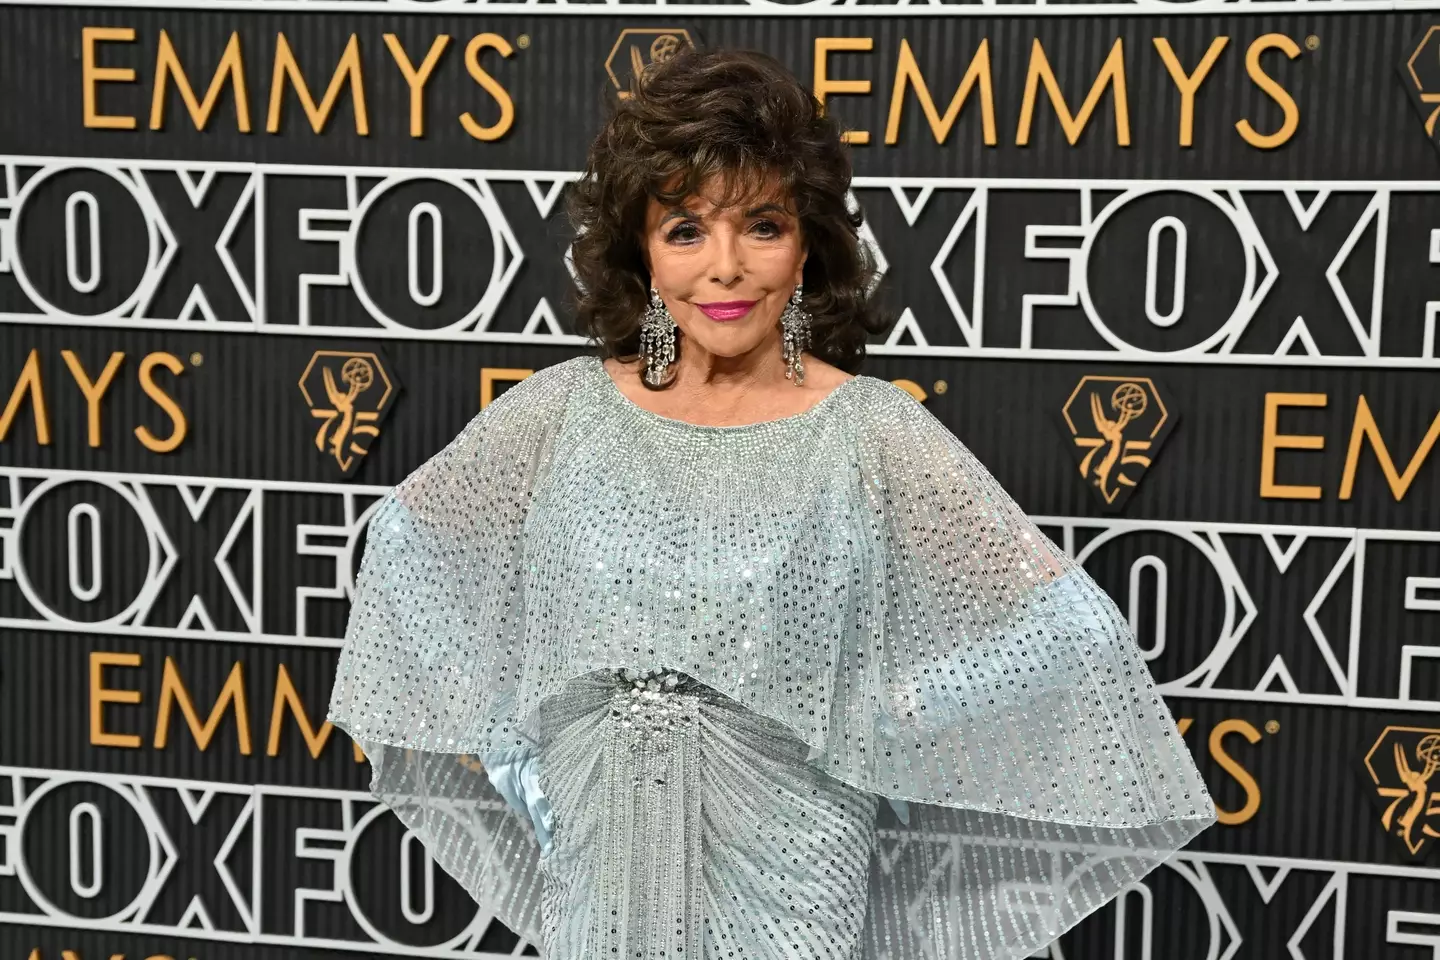 Joan Collins presented an award at the Emmys.